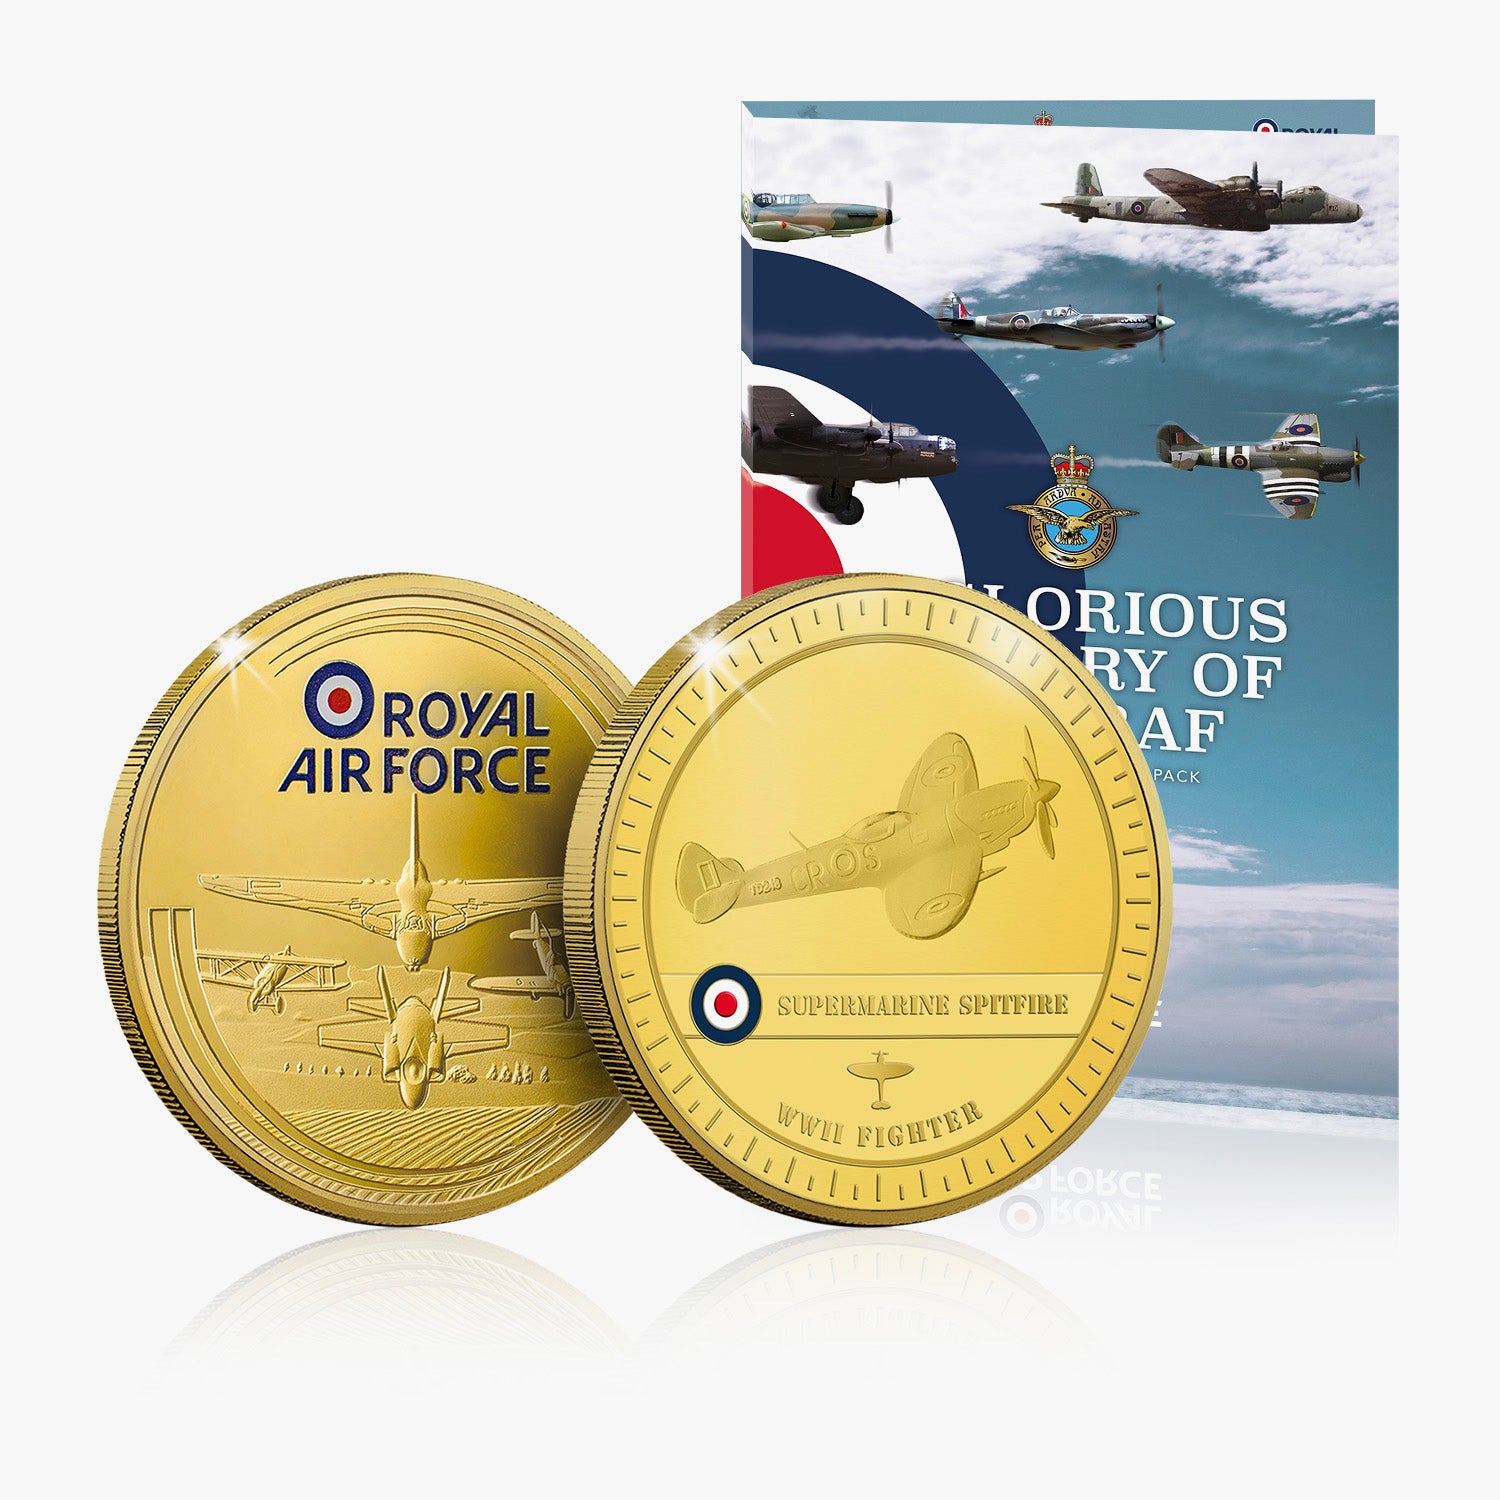 The Official Glorious History of the RAF Collection